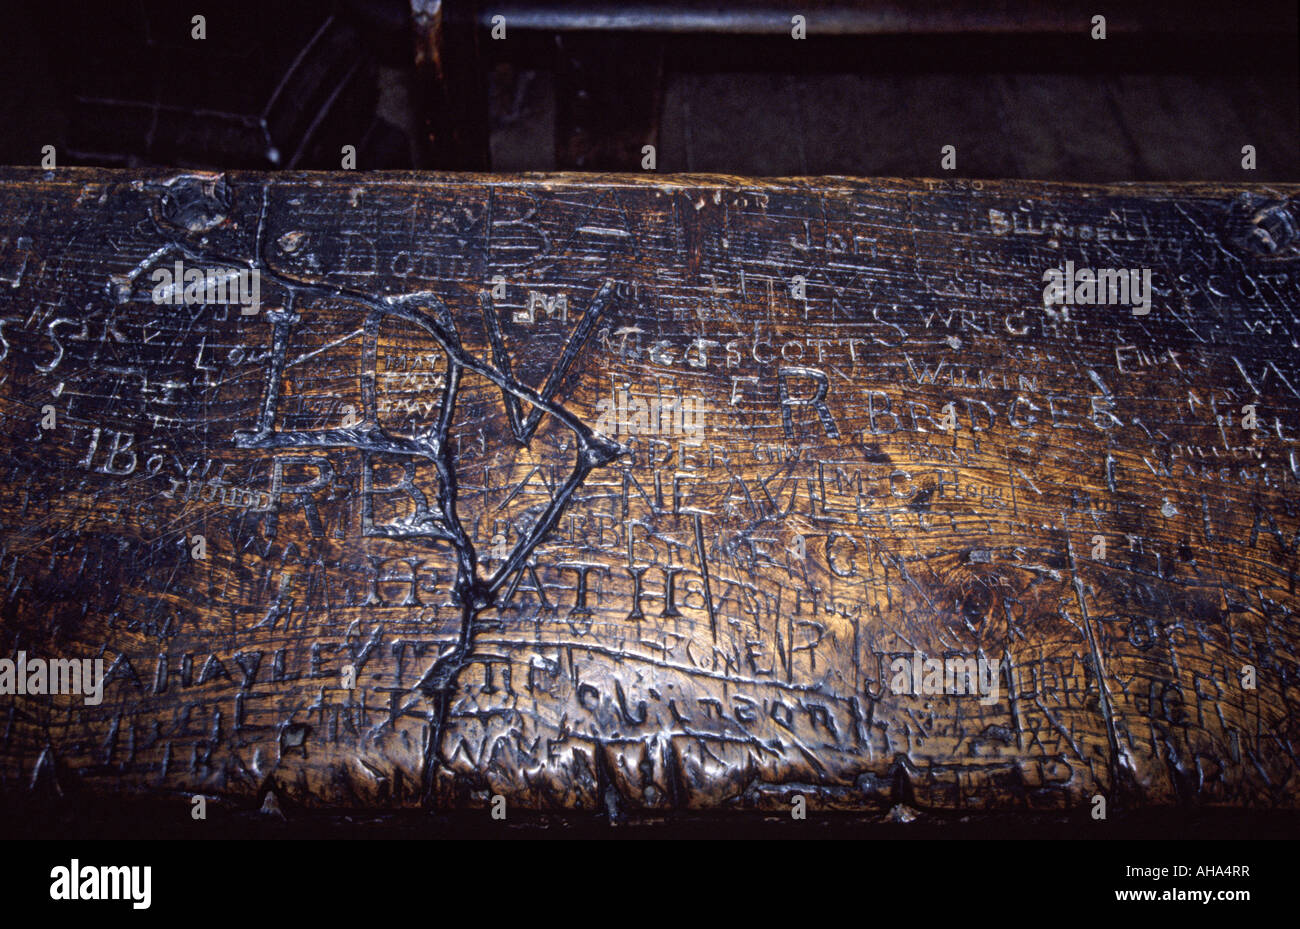 One of the famous desks at Eton College where students have carved their names for centuries, Eton, near Windsor, England UK Stock Photo